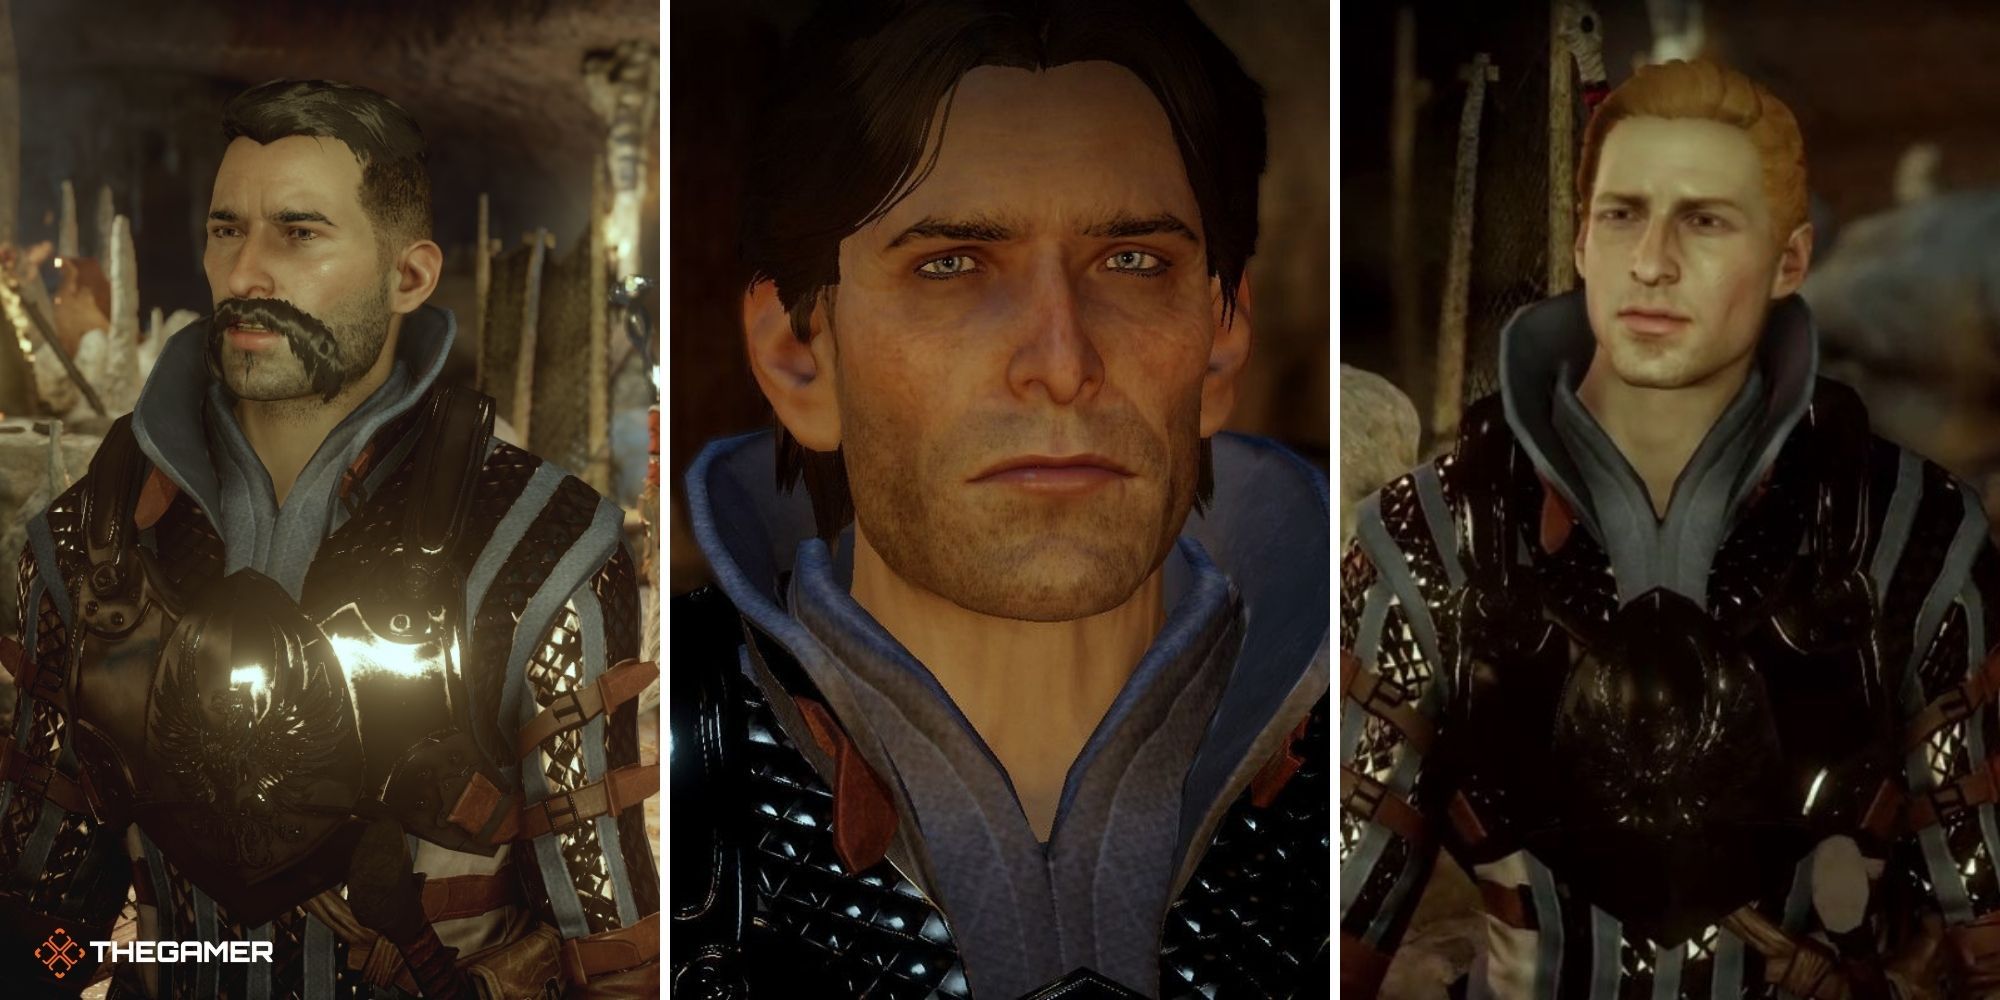 Dragon Age Split Image - Warden Ally (Stroud on left, Loghain in centre, Alistair on right)